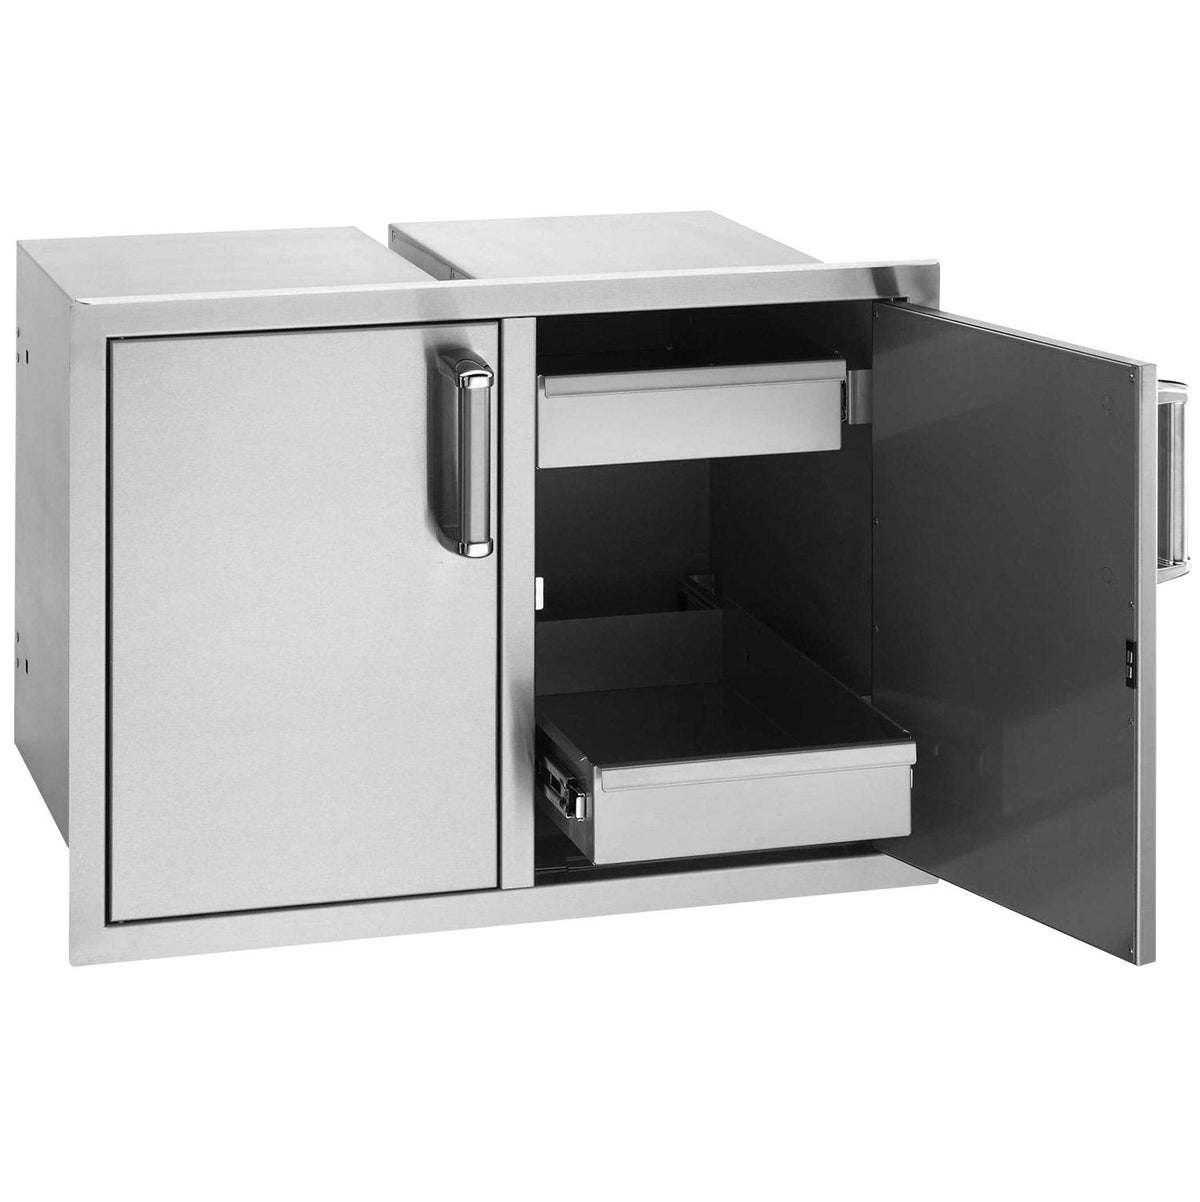 Fire Magic Premium Flush 30 Inch Enclosed Cabinet Storage With Drawers